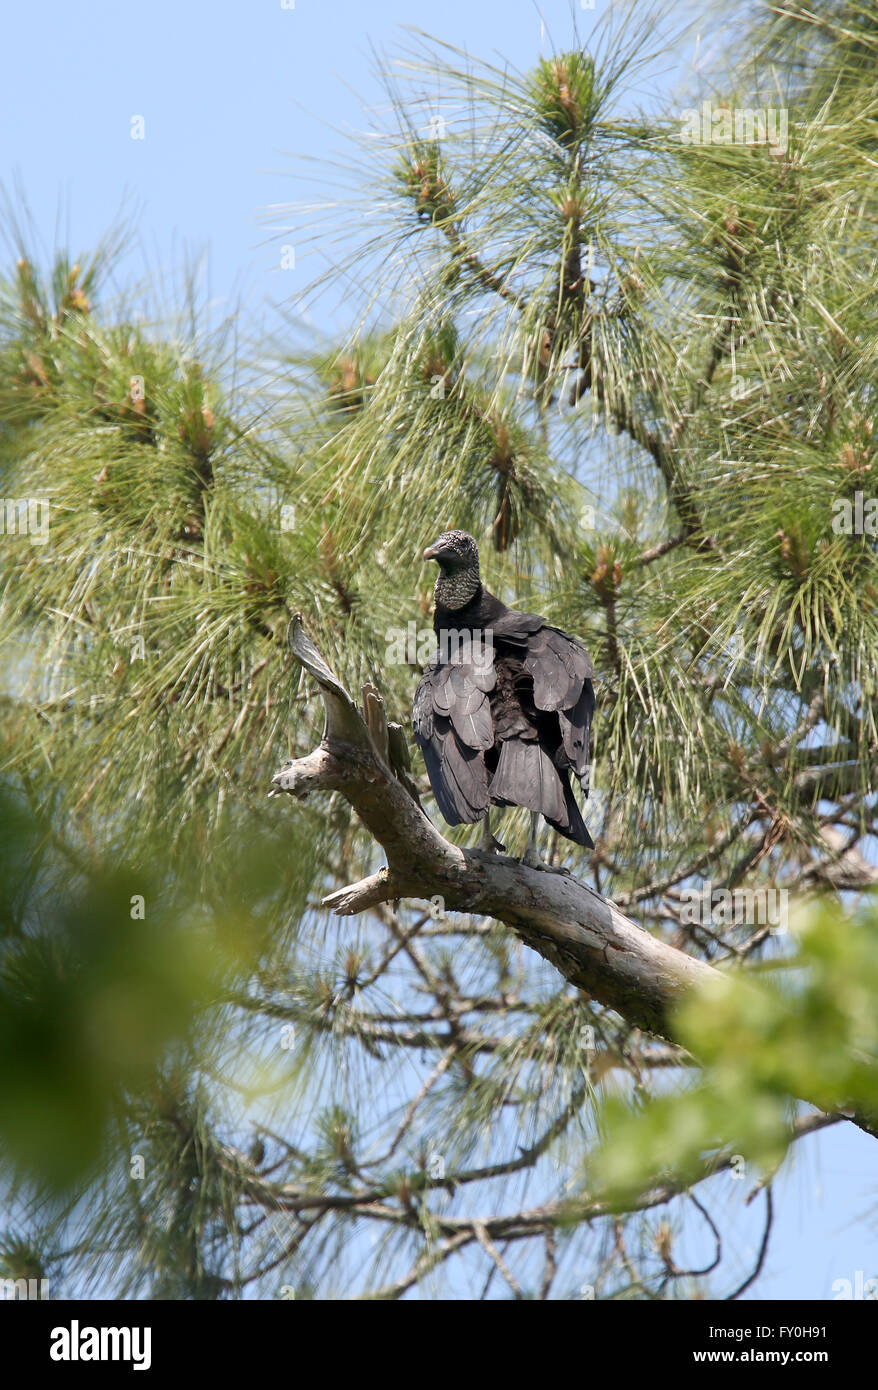 Black Vulture in trees near a residential area in mid Florida, just south of Orlando.  19th April 2016 Stock Photo